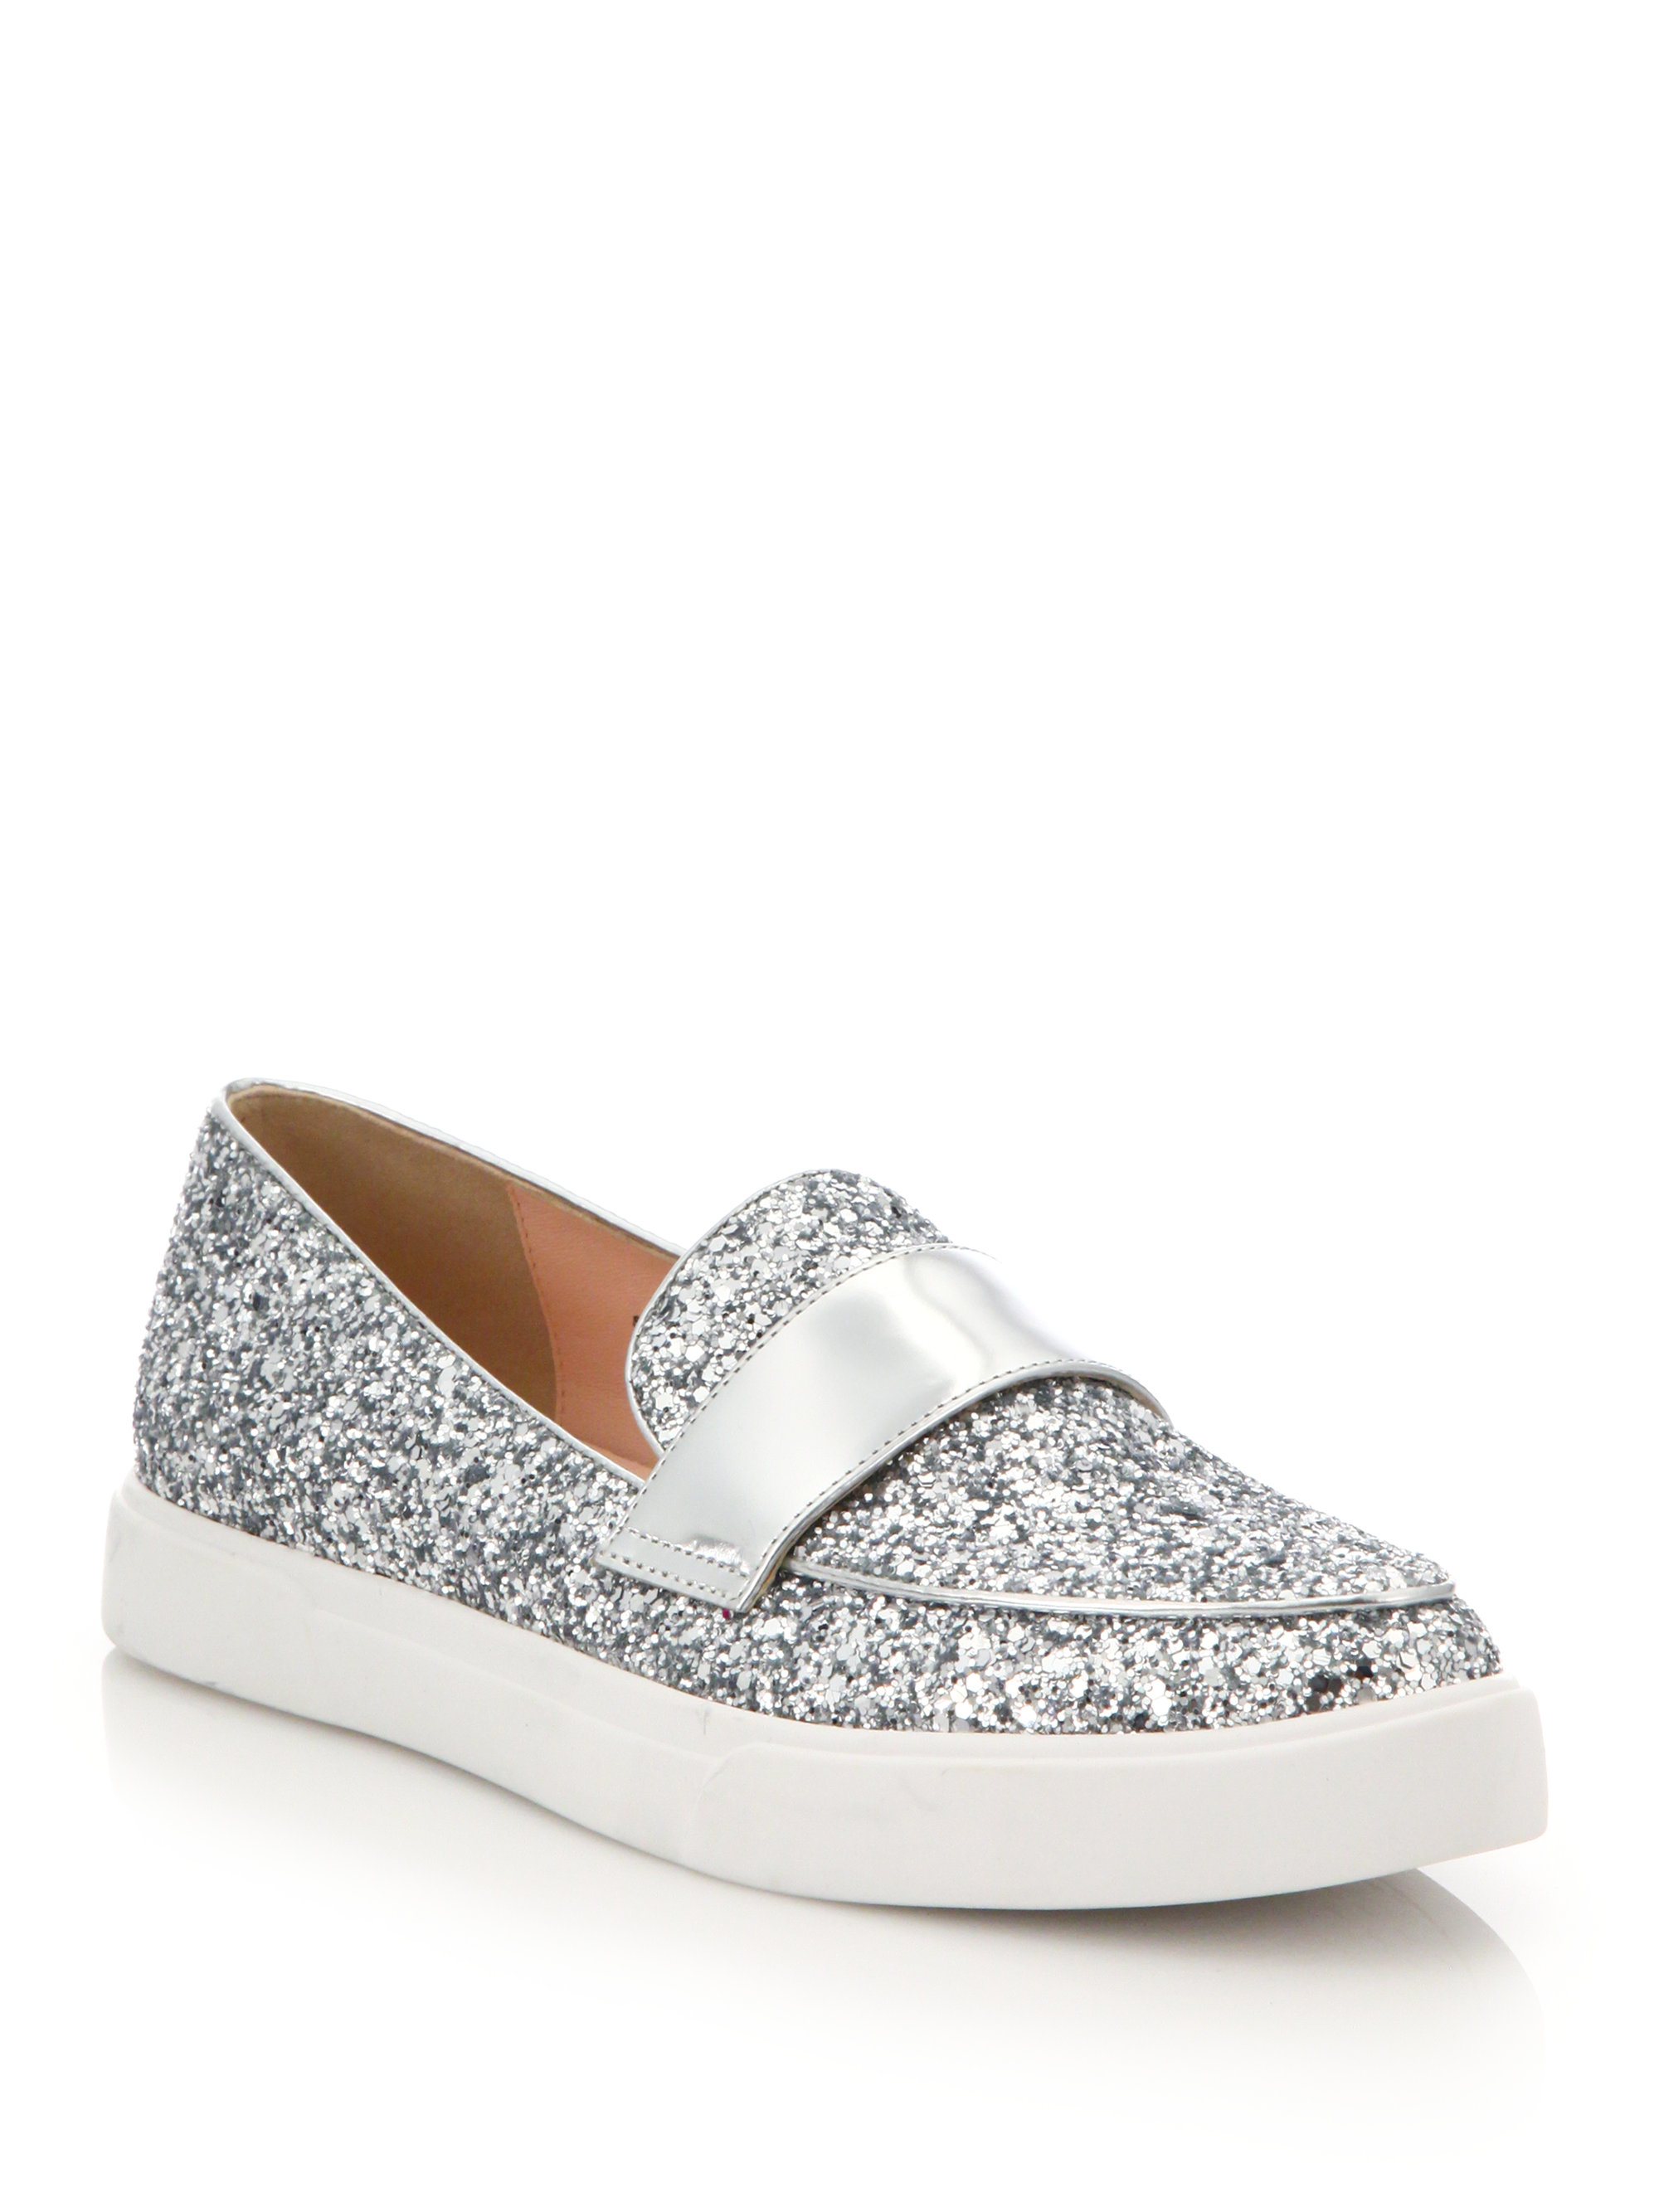 Lyst - Kate Spade New York Clover Glittered Leather Slip-on Sneakers in ...